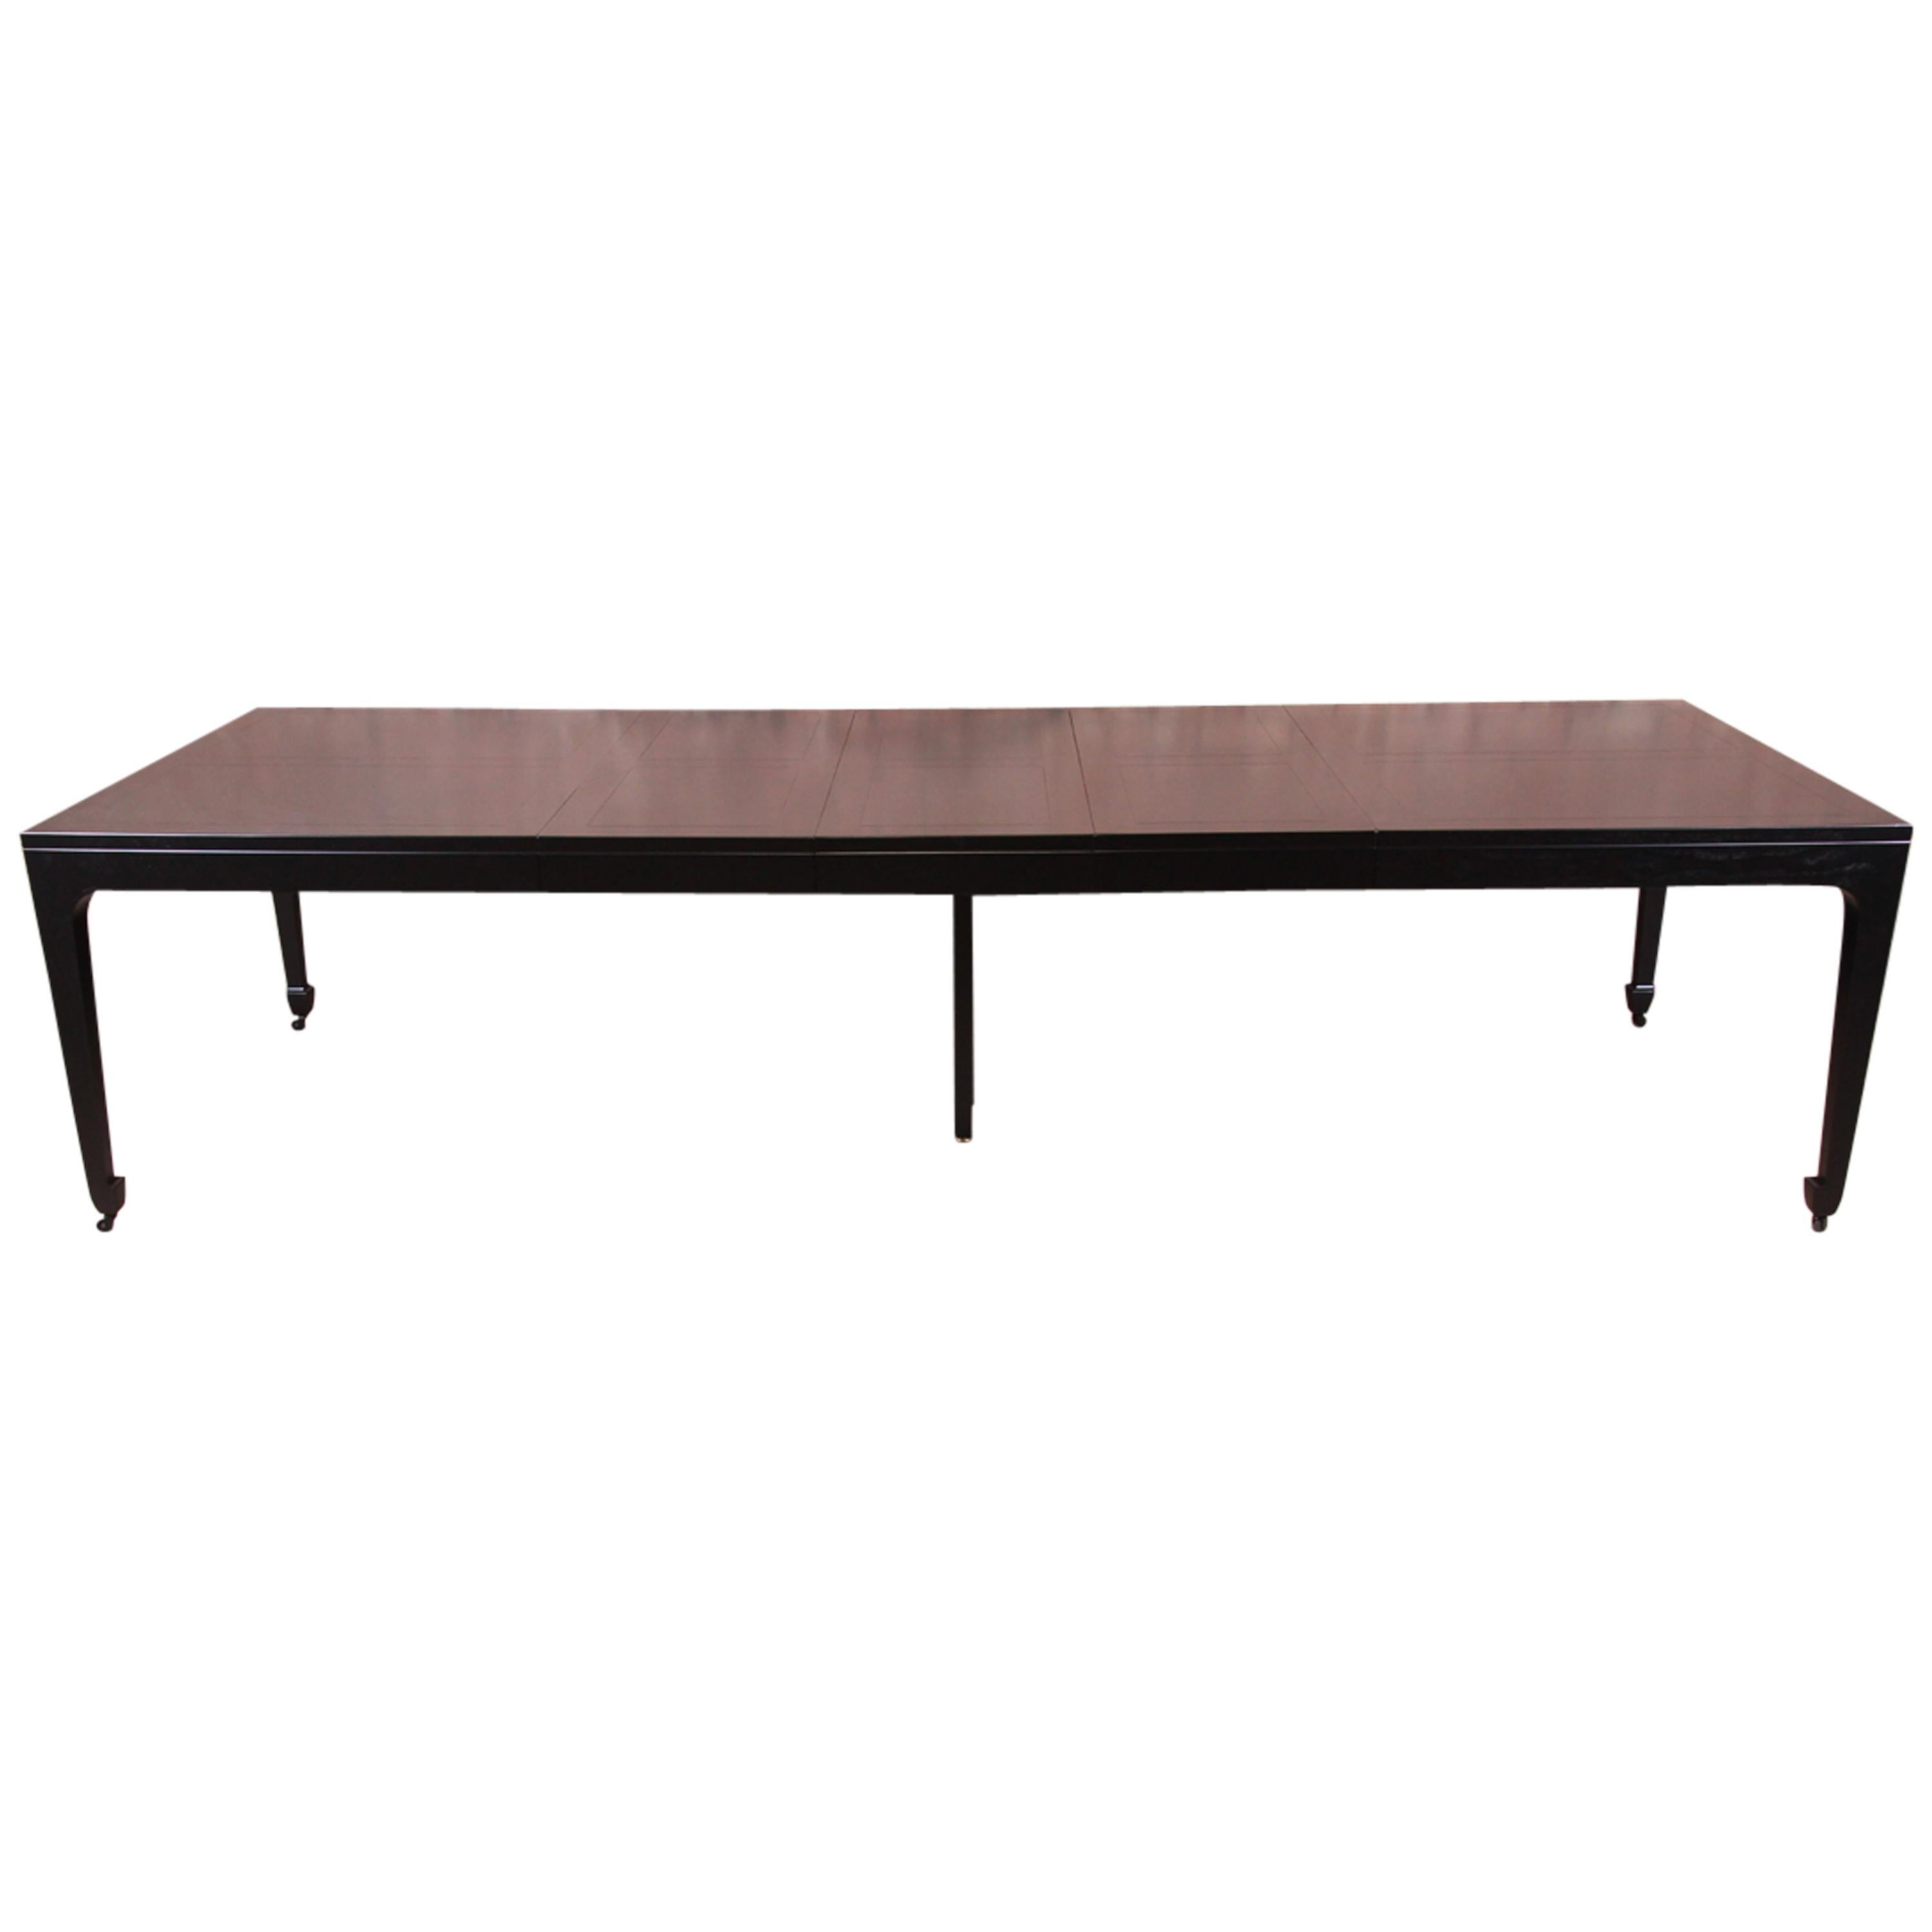 Michael Taylor for Baker Ebonized Chinoiserie Extension Dining Table, Seats 14